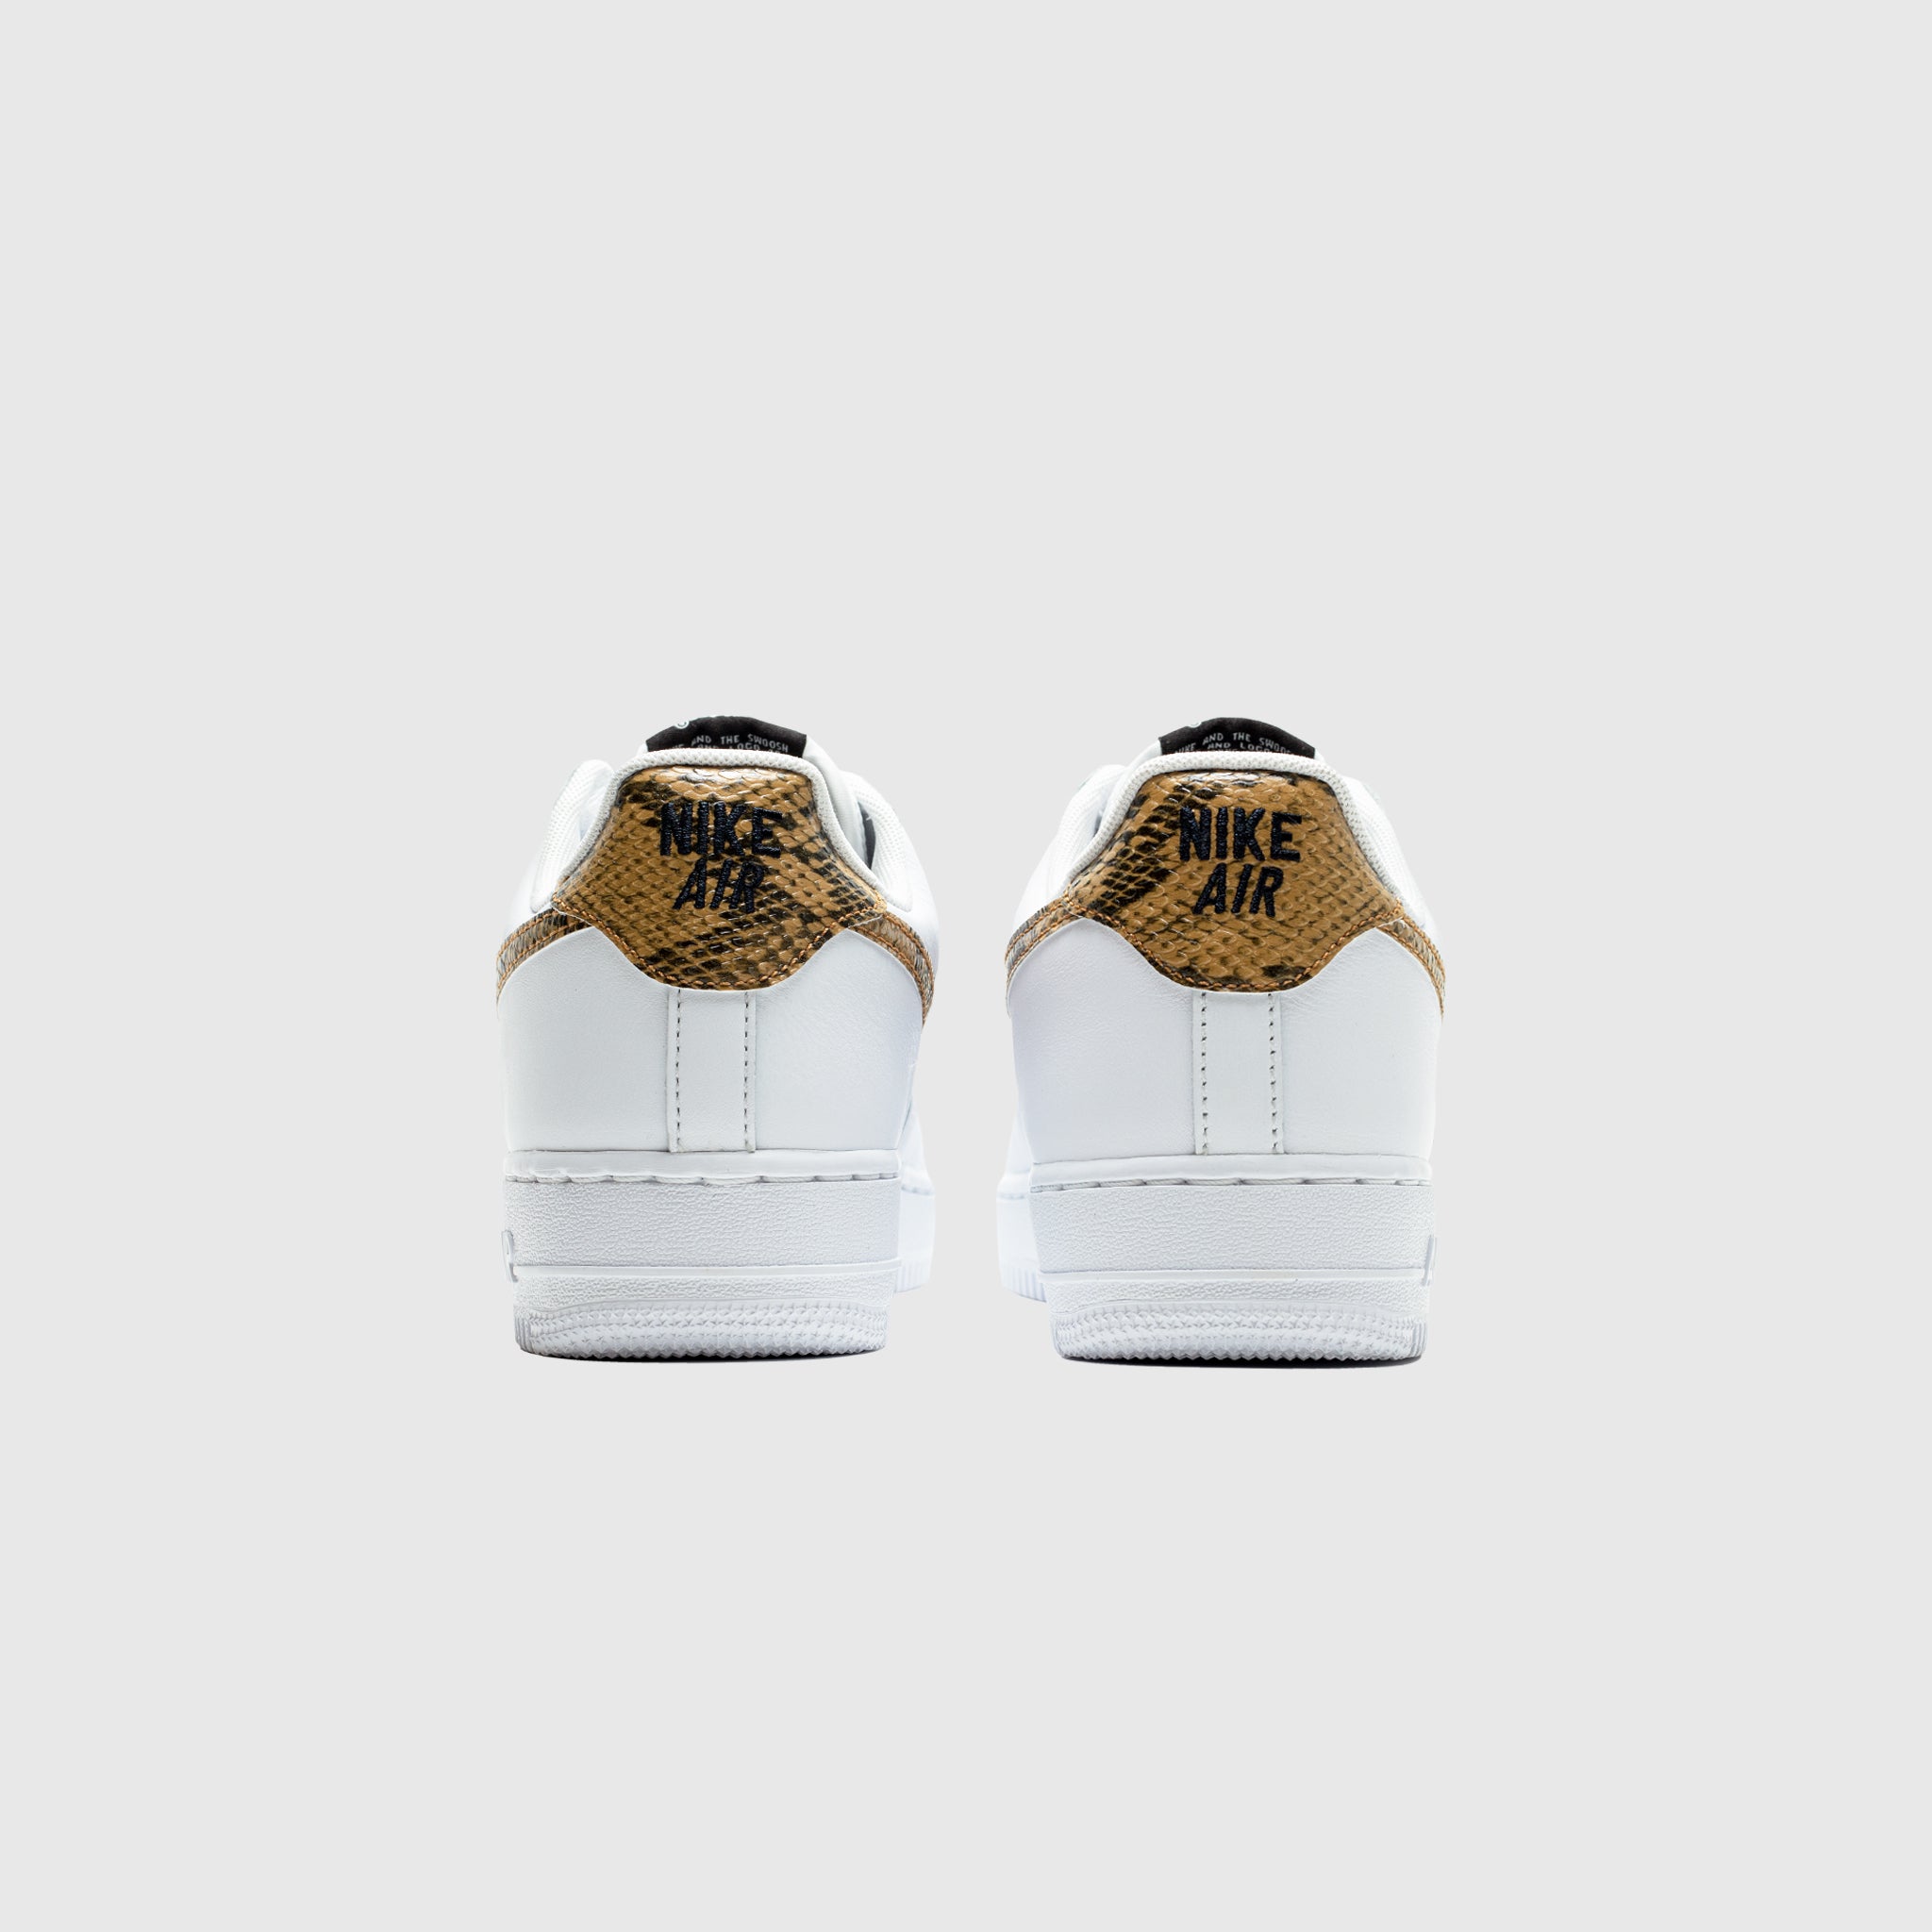 AIR FORCE 1 LOW RETRO PRM "IVORY SNAKE"